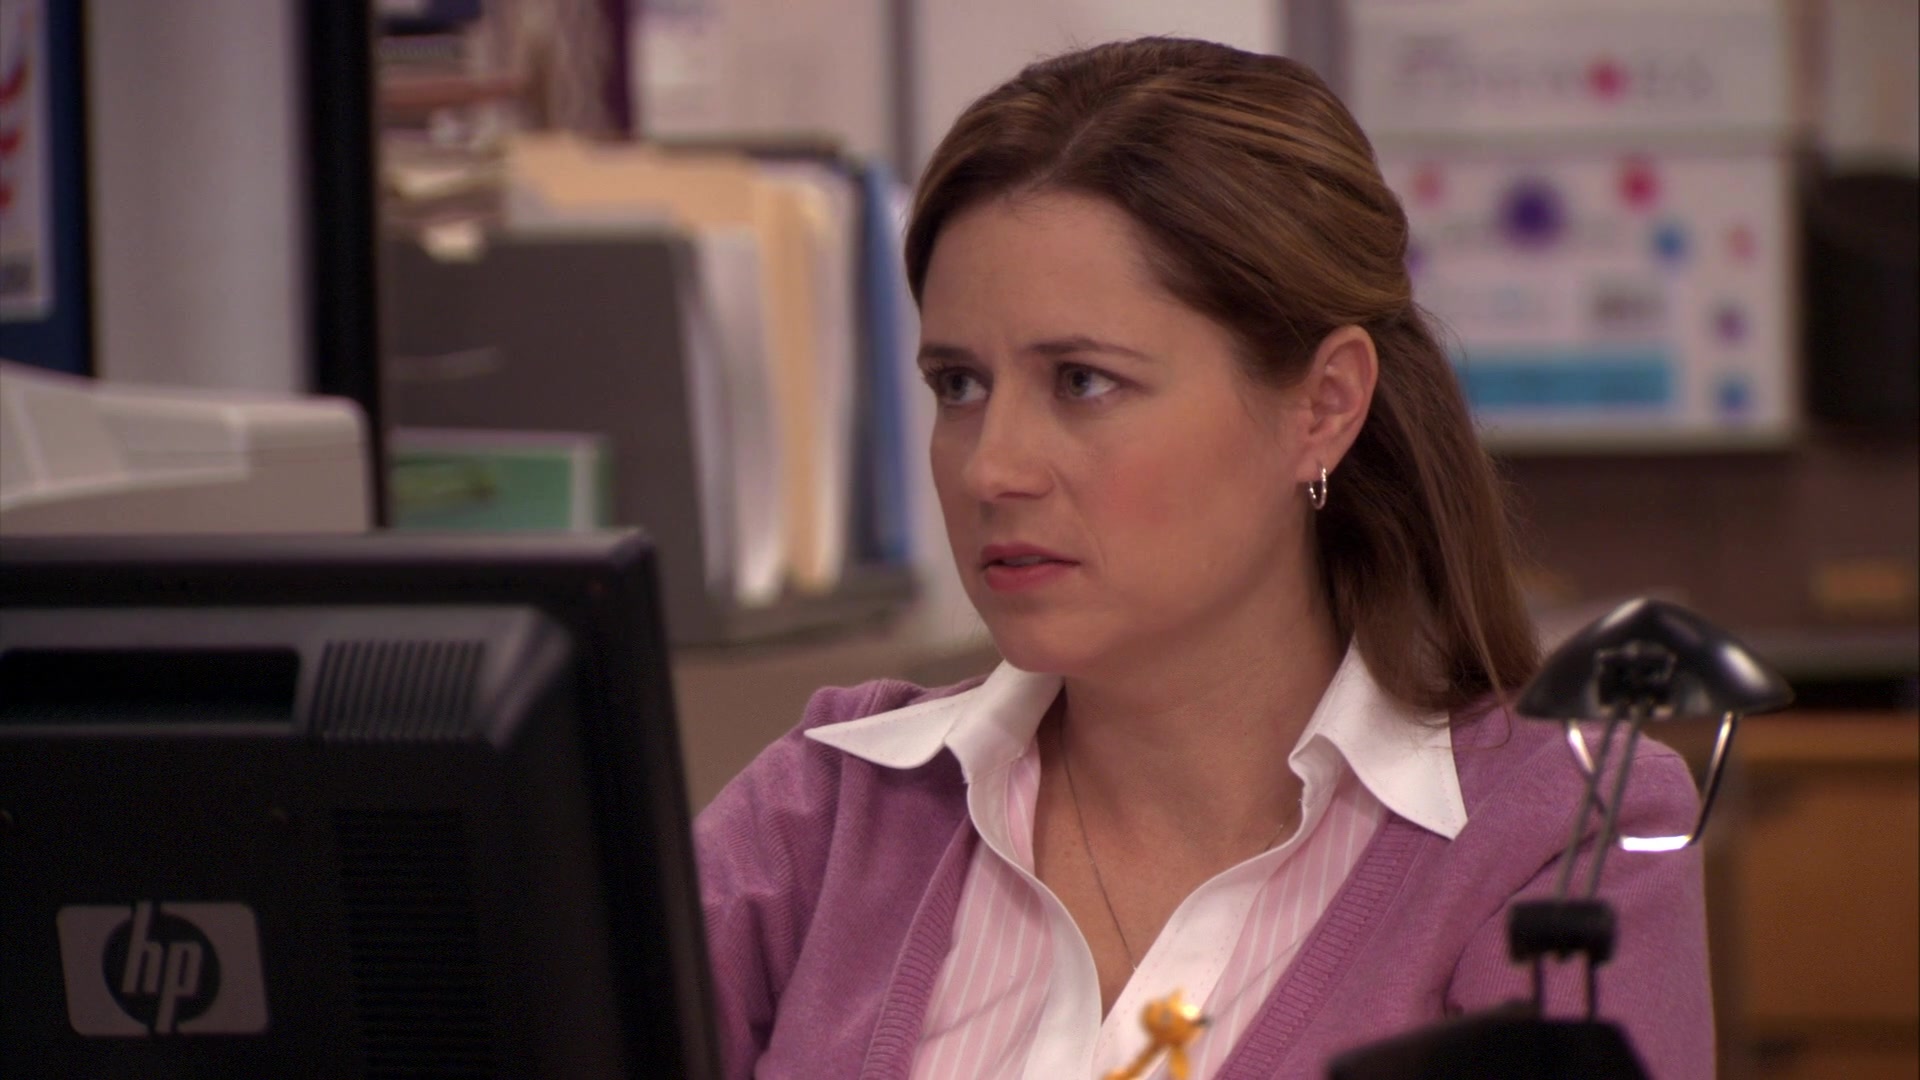 HP Monitor Used by Jenna Fischer (Pam Beesly) in The Office - Season 7, Epi...